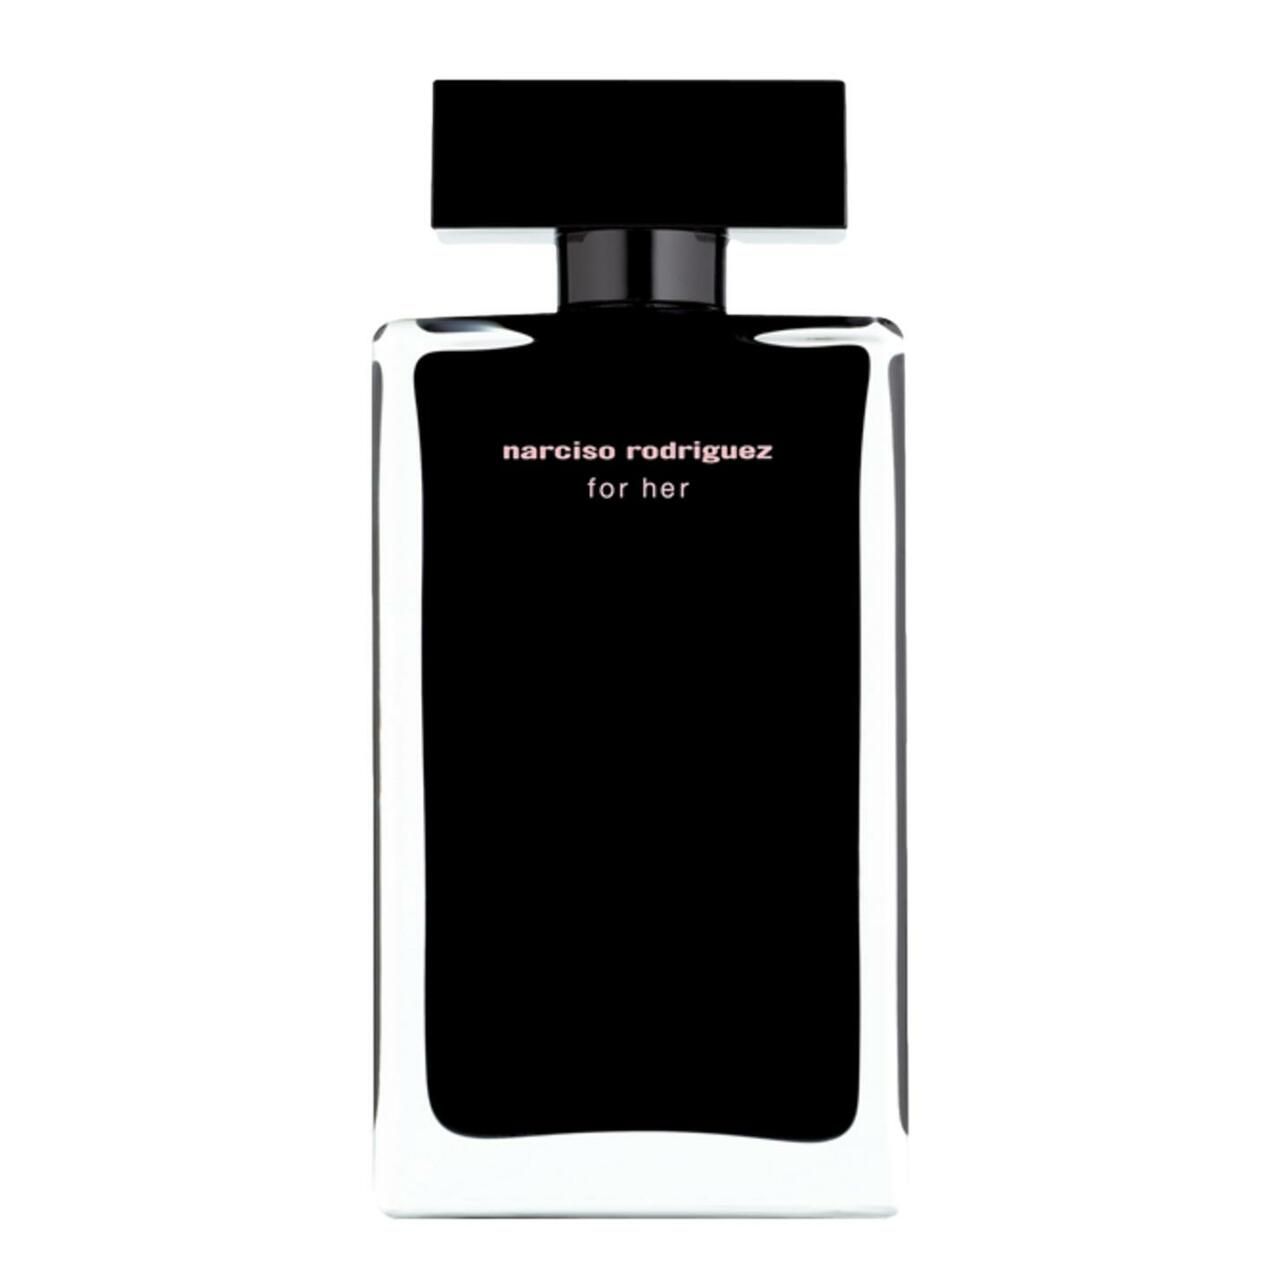 Narciso Rodriguez, For Her E.d.T. Nat. Spray